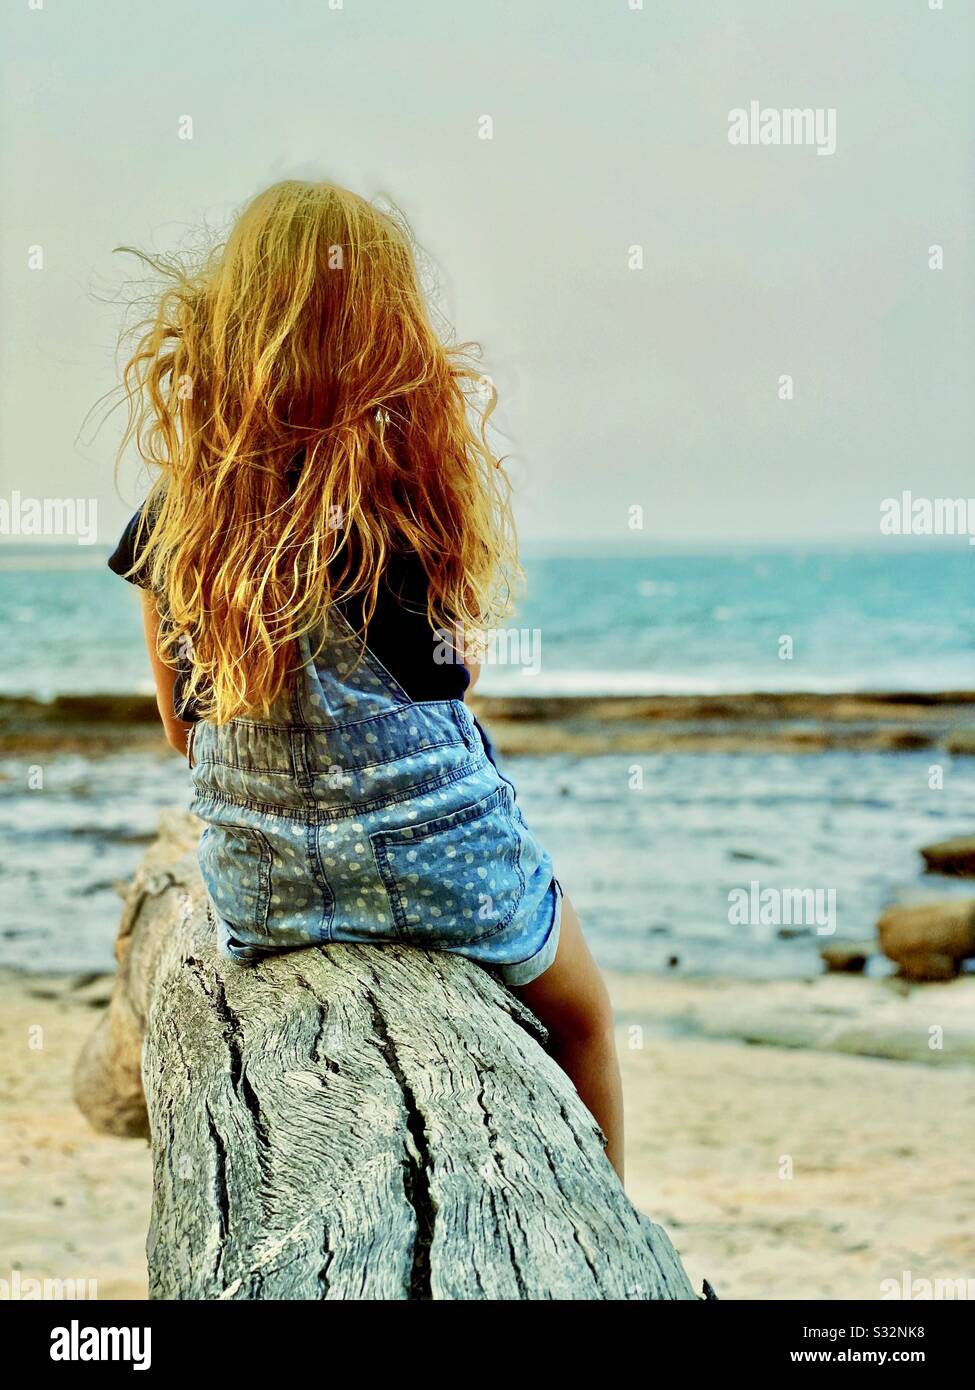 Back view of young girl with long red hair seating on log looking to sea. Concepts of dreaming, wanderlust, childhood and lifestyle Stock Photo